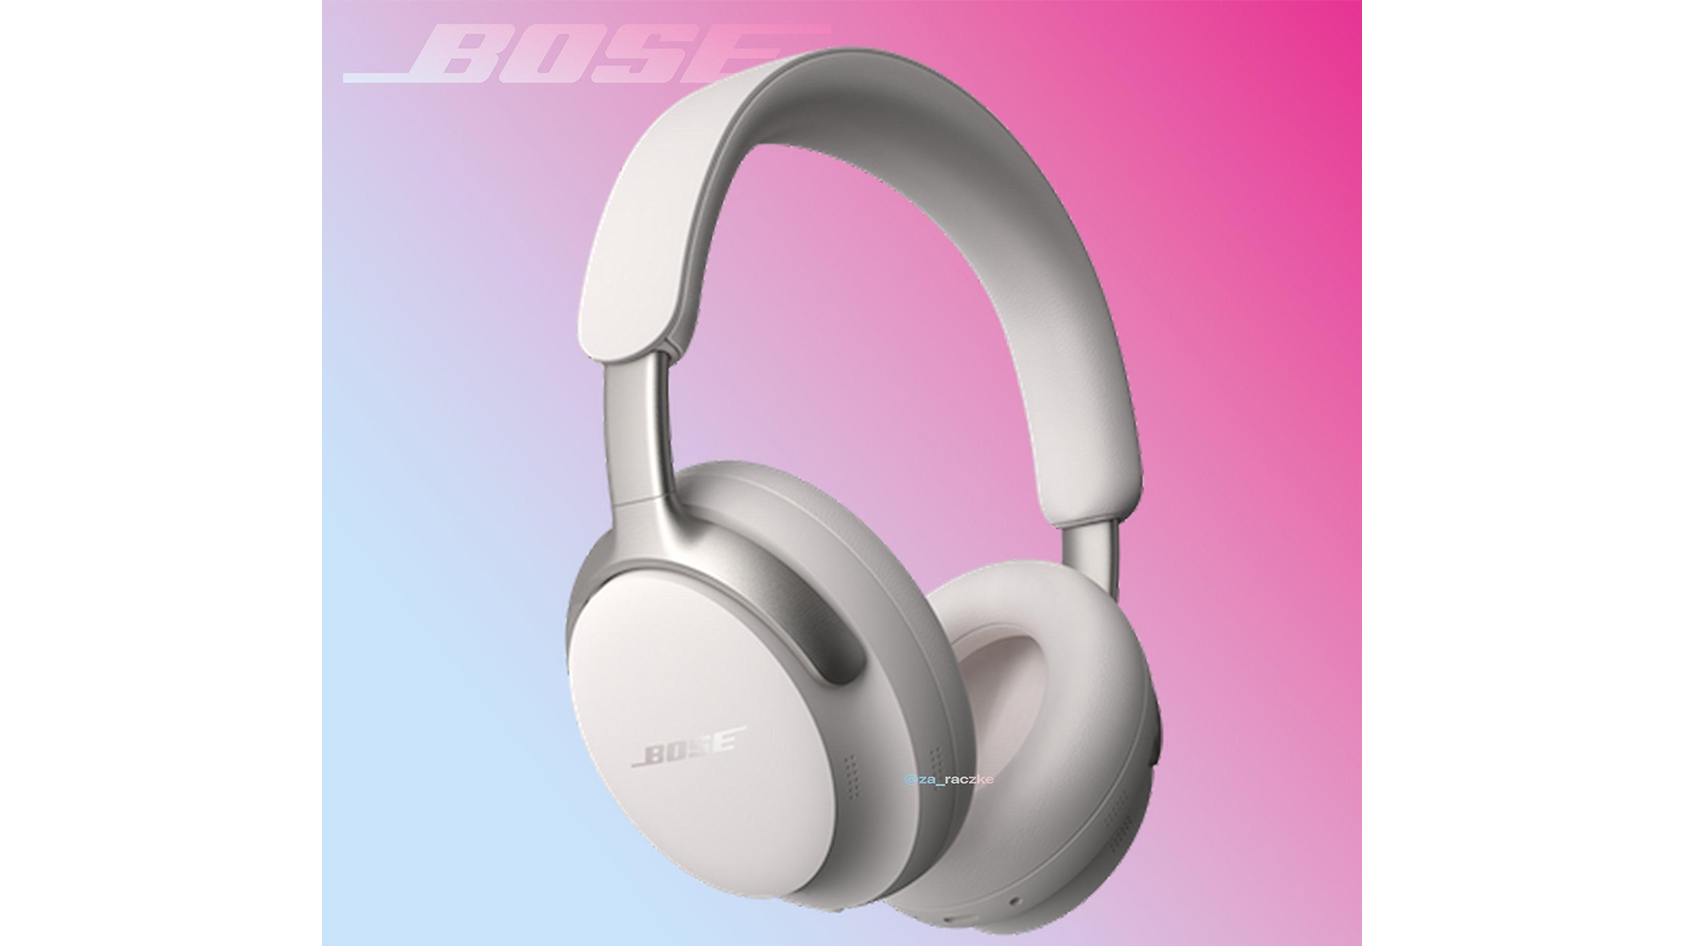 Bose Ultra: date, price, rumors, features, more